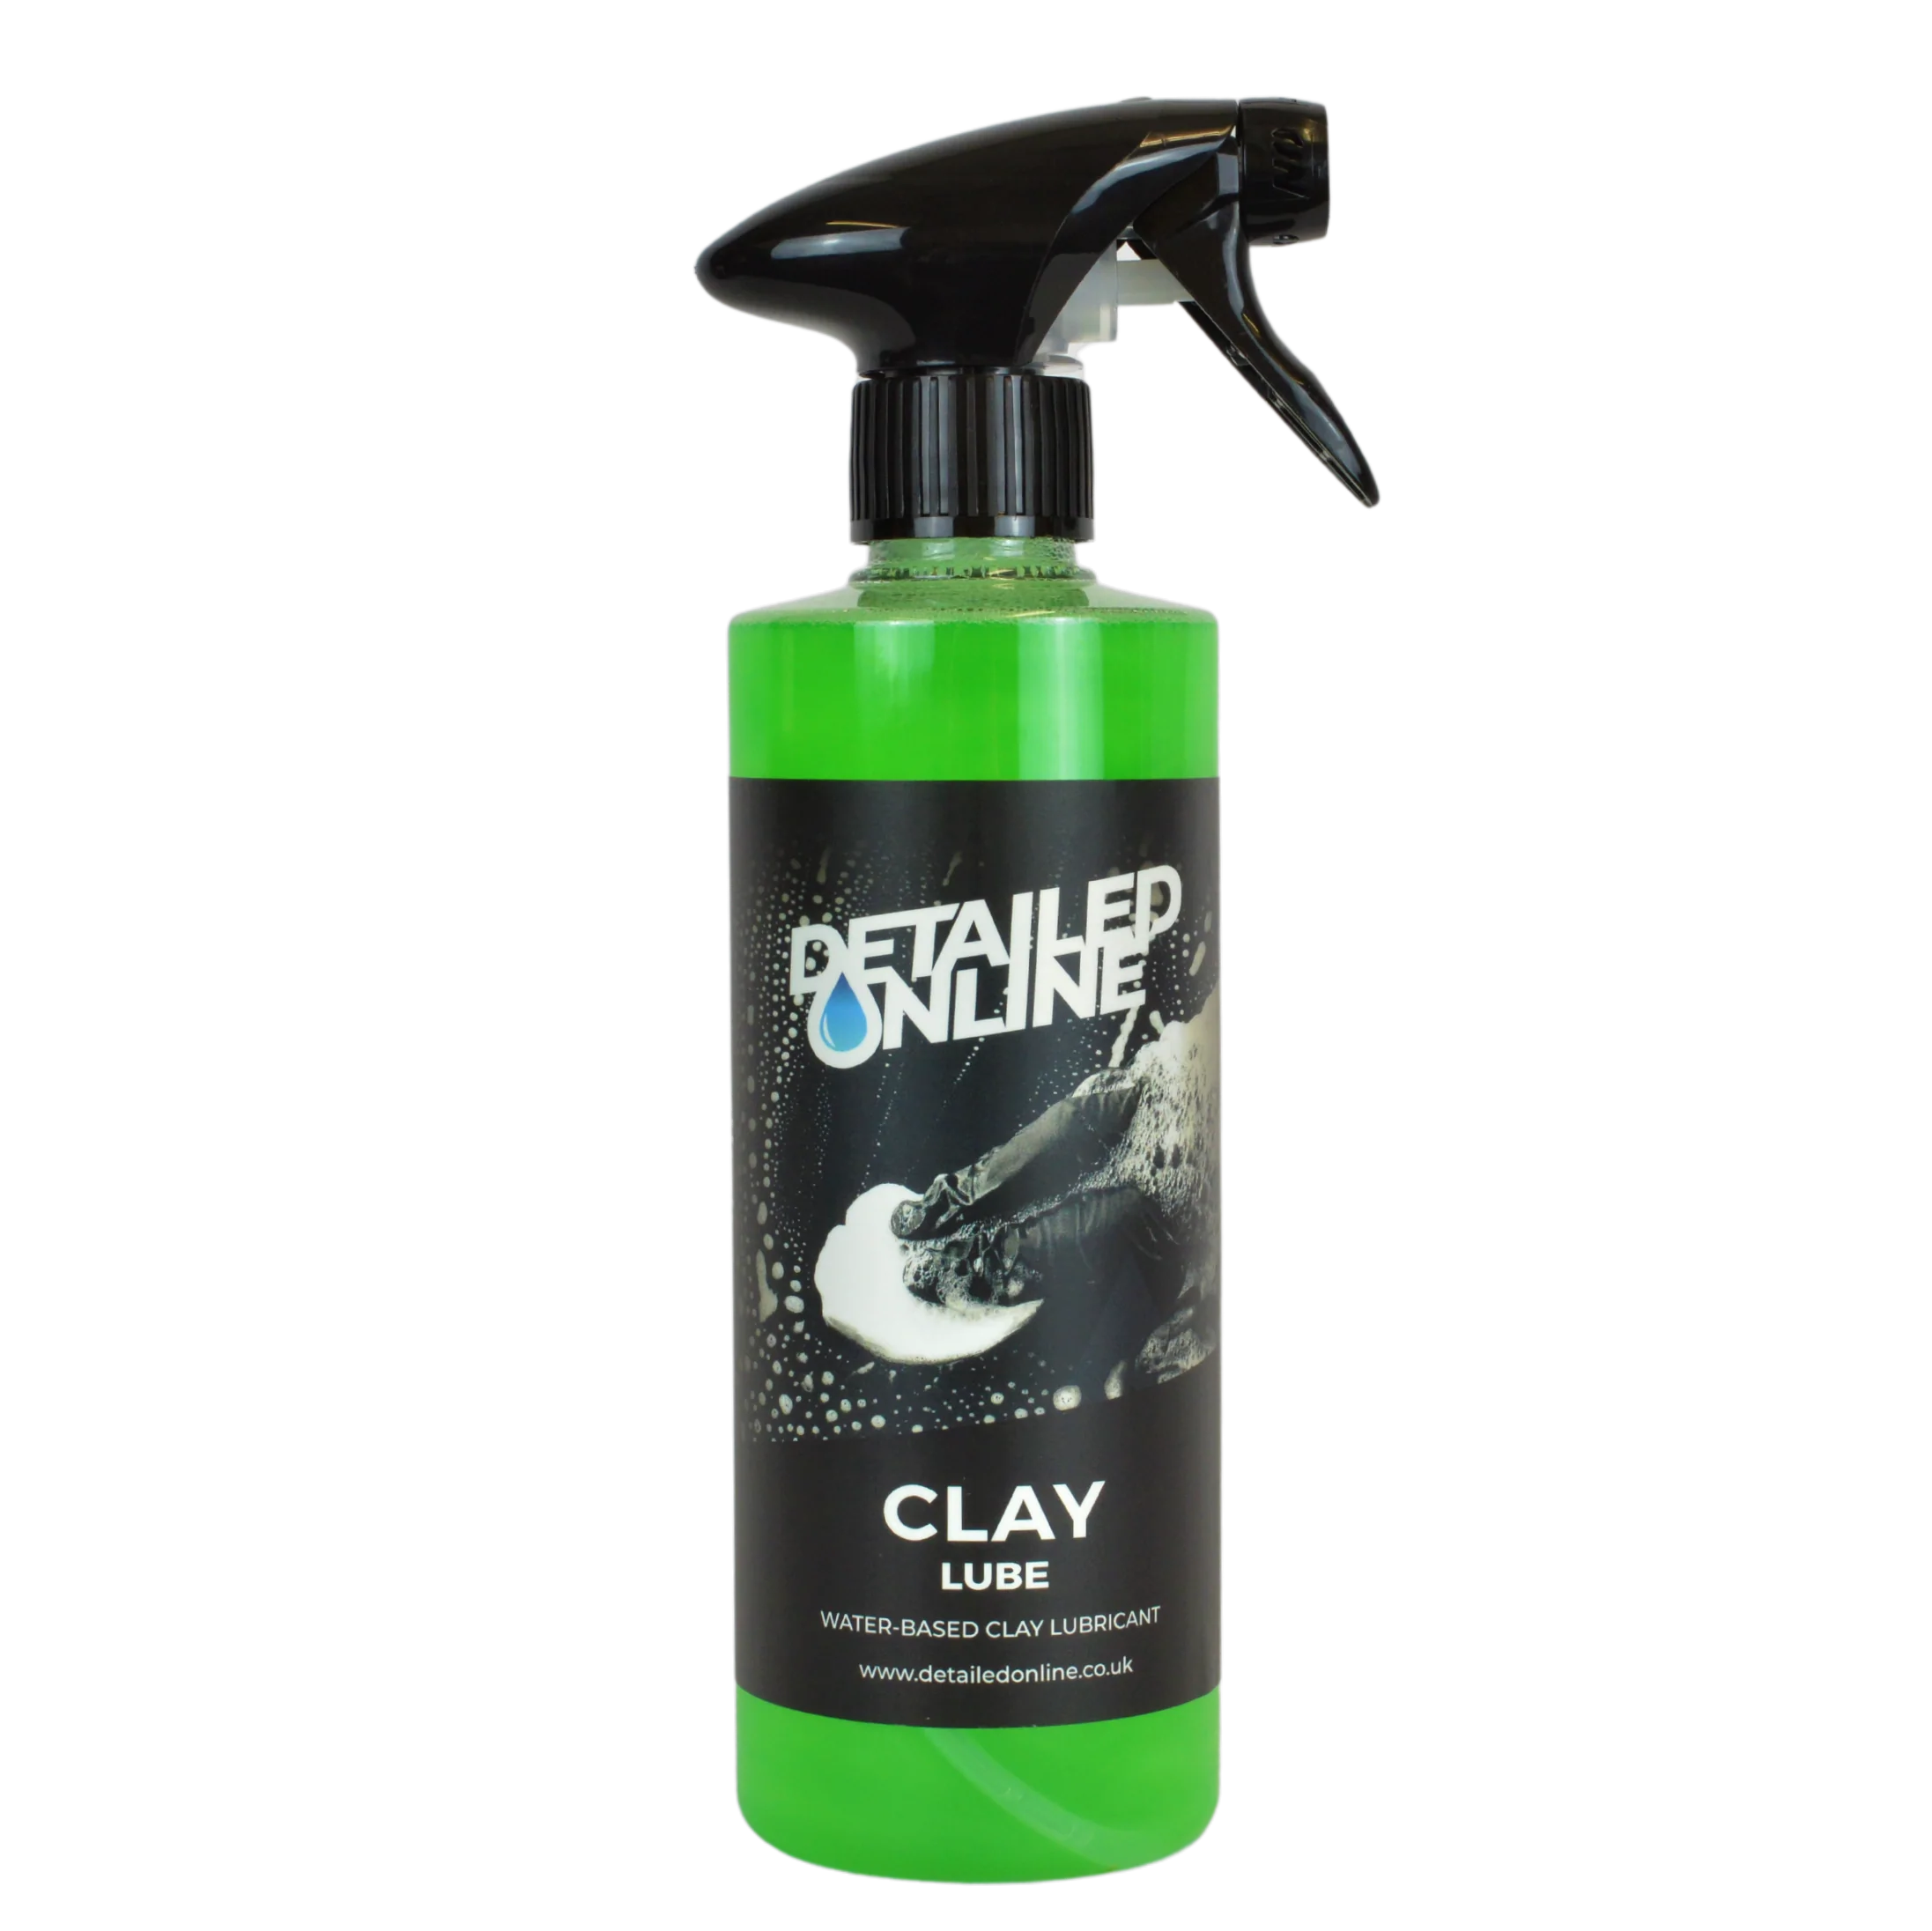 Clay Lube